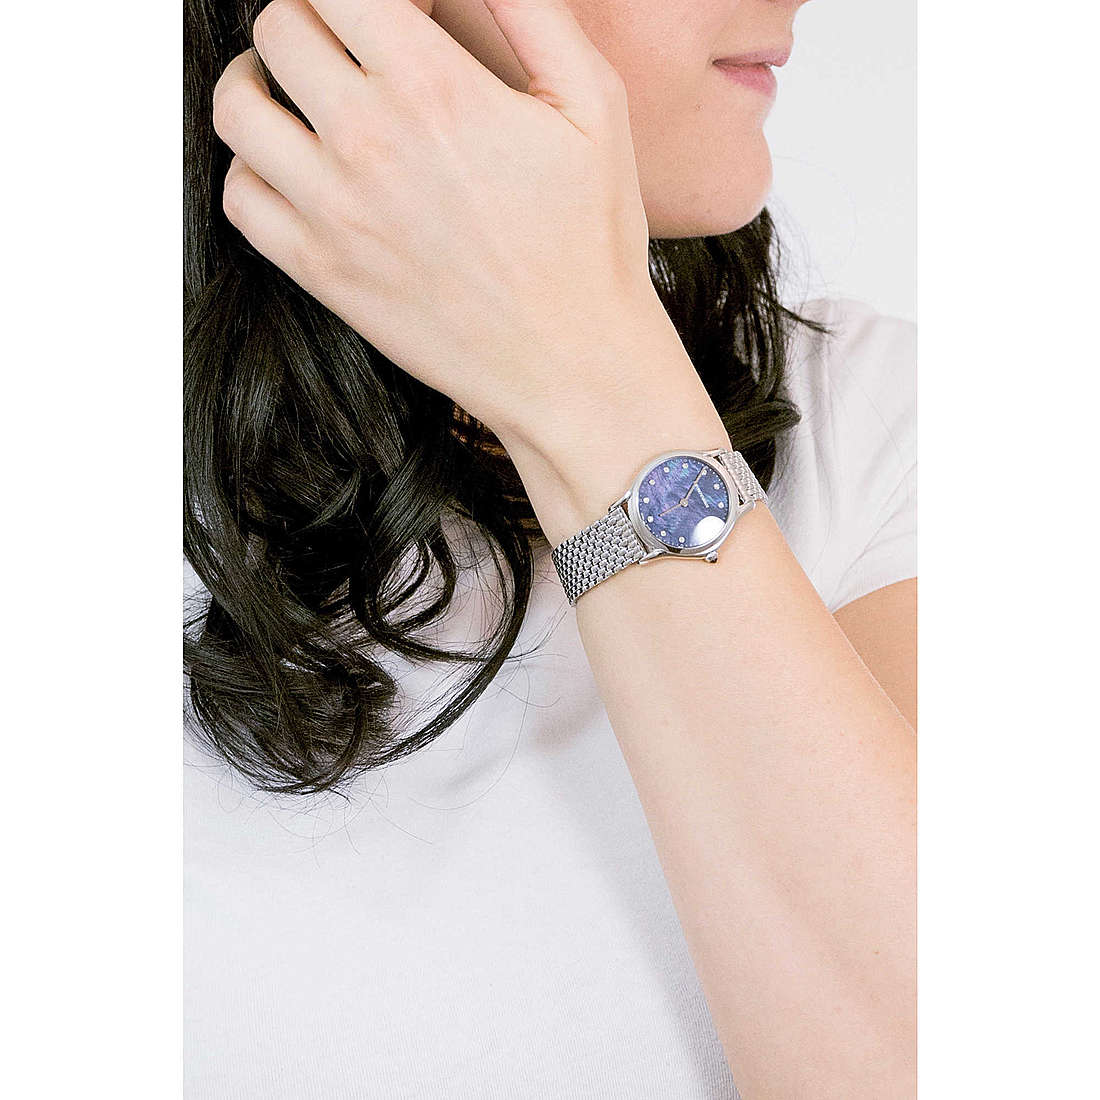 Emporio Armani Swiss only time woman ARS7507 wearing